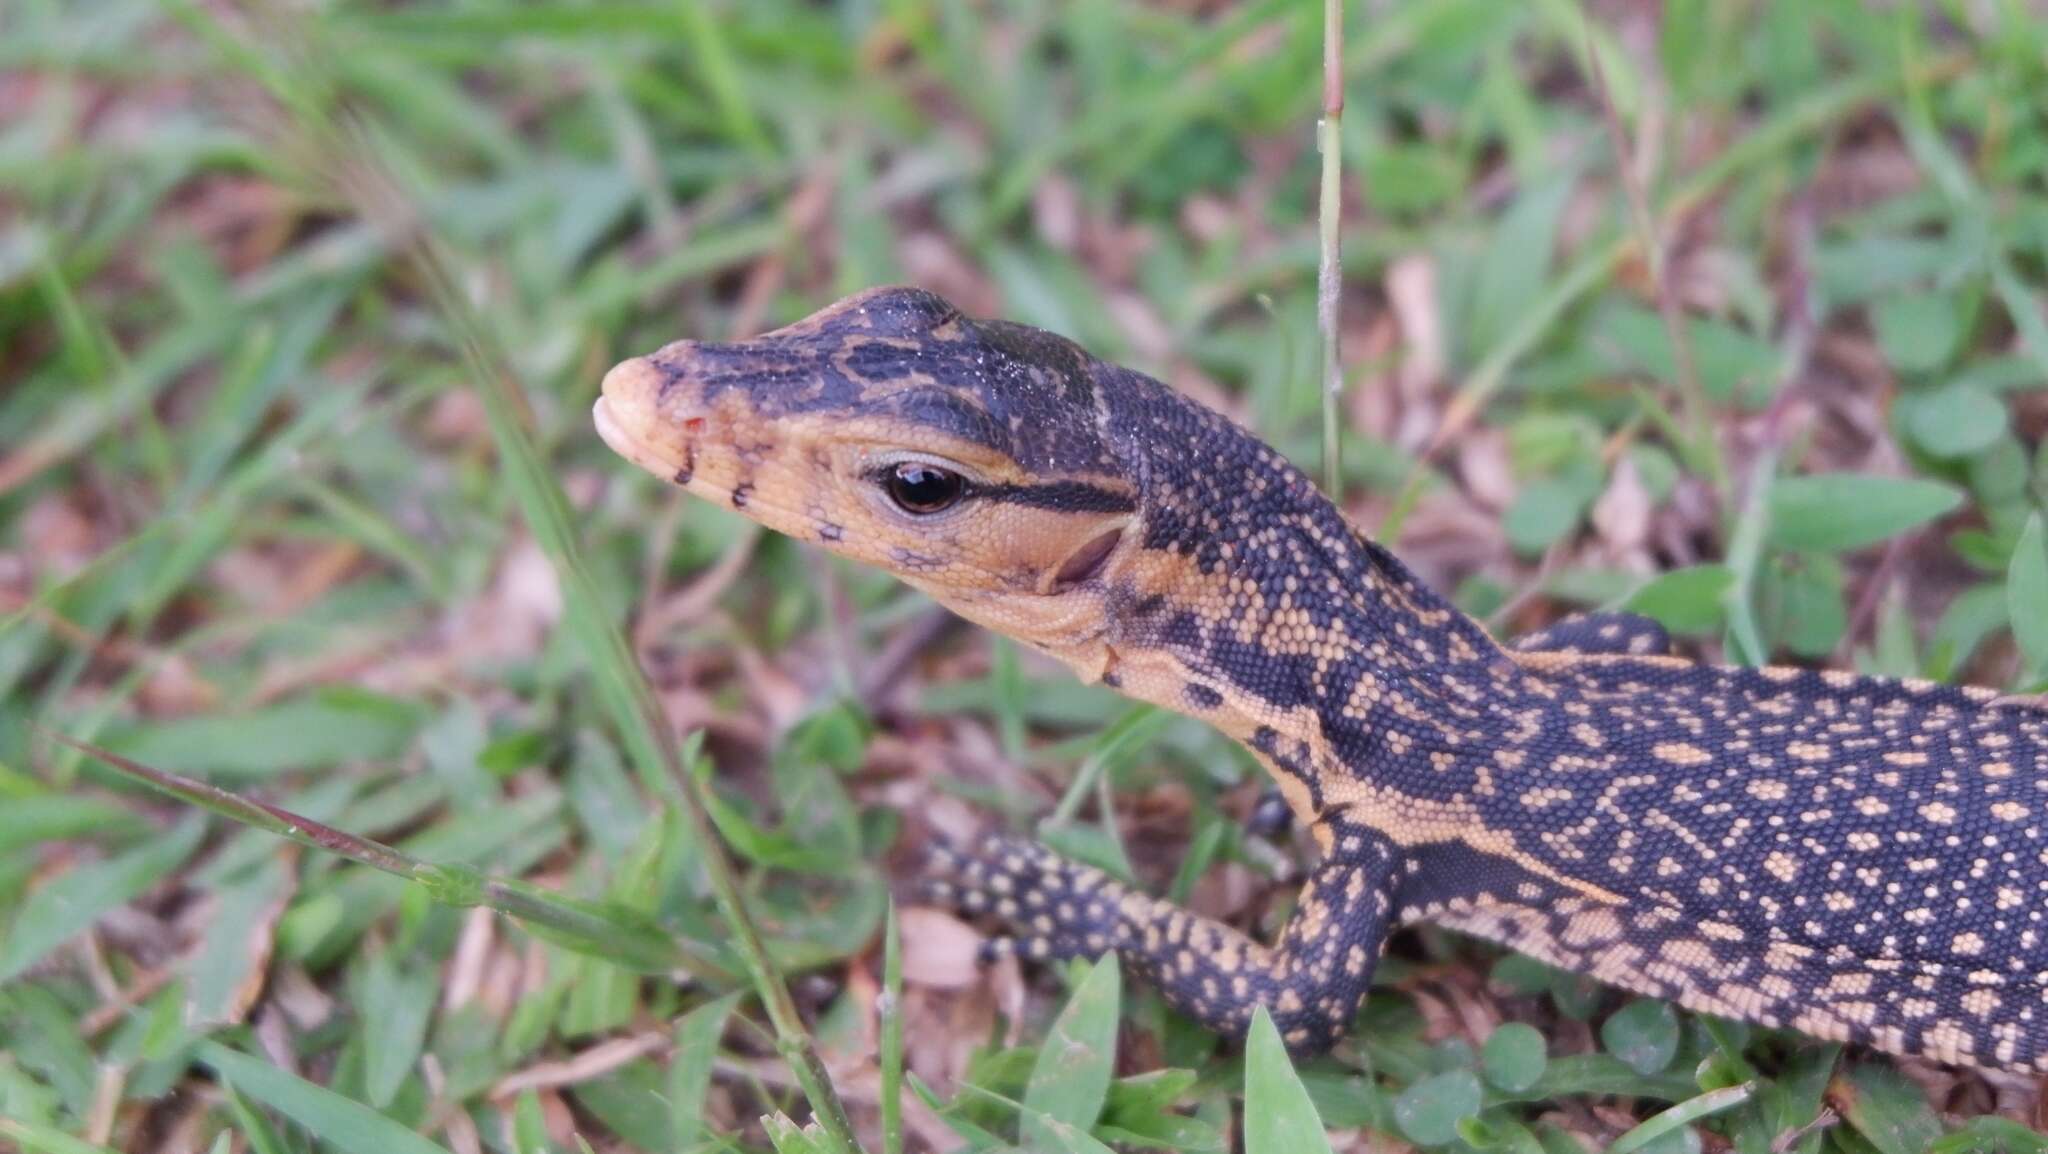 Image of Togian Water Monitor